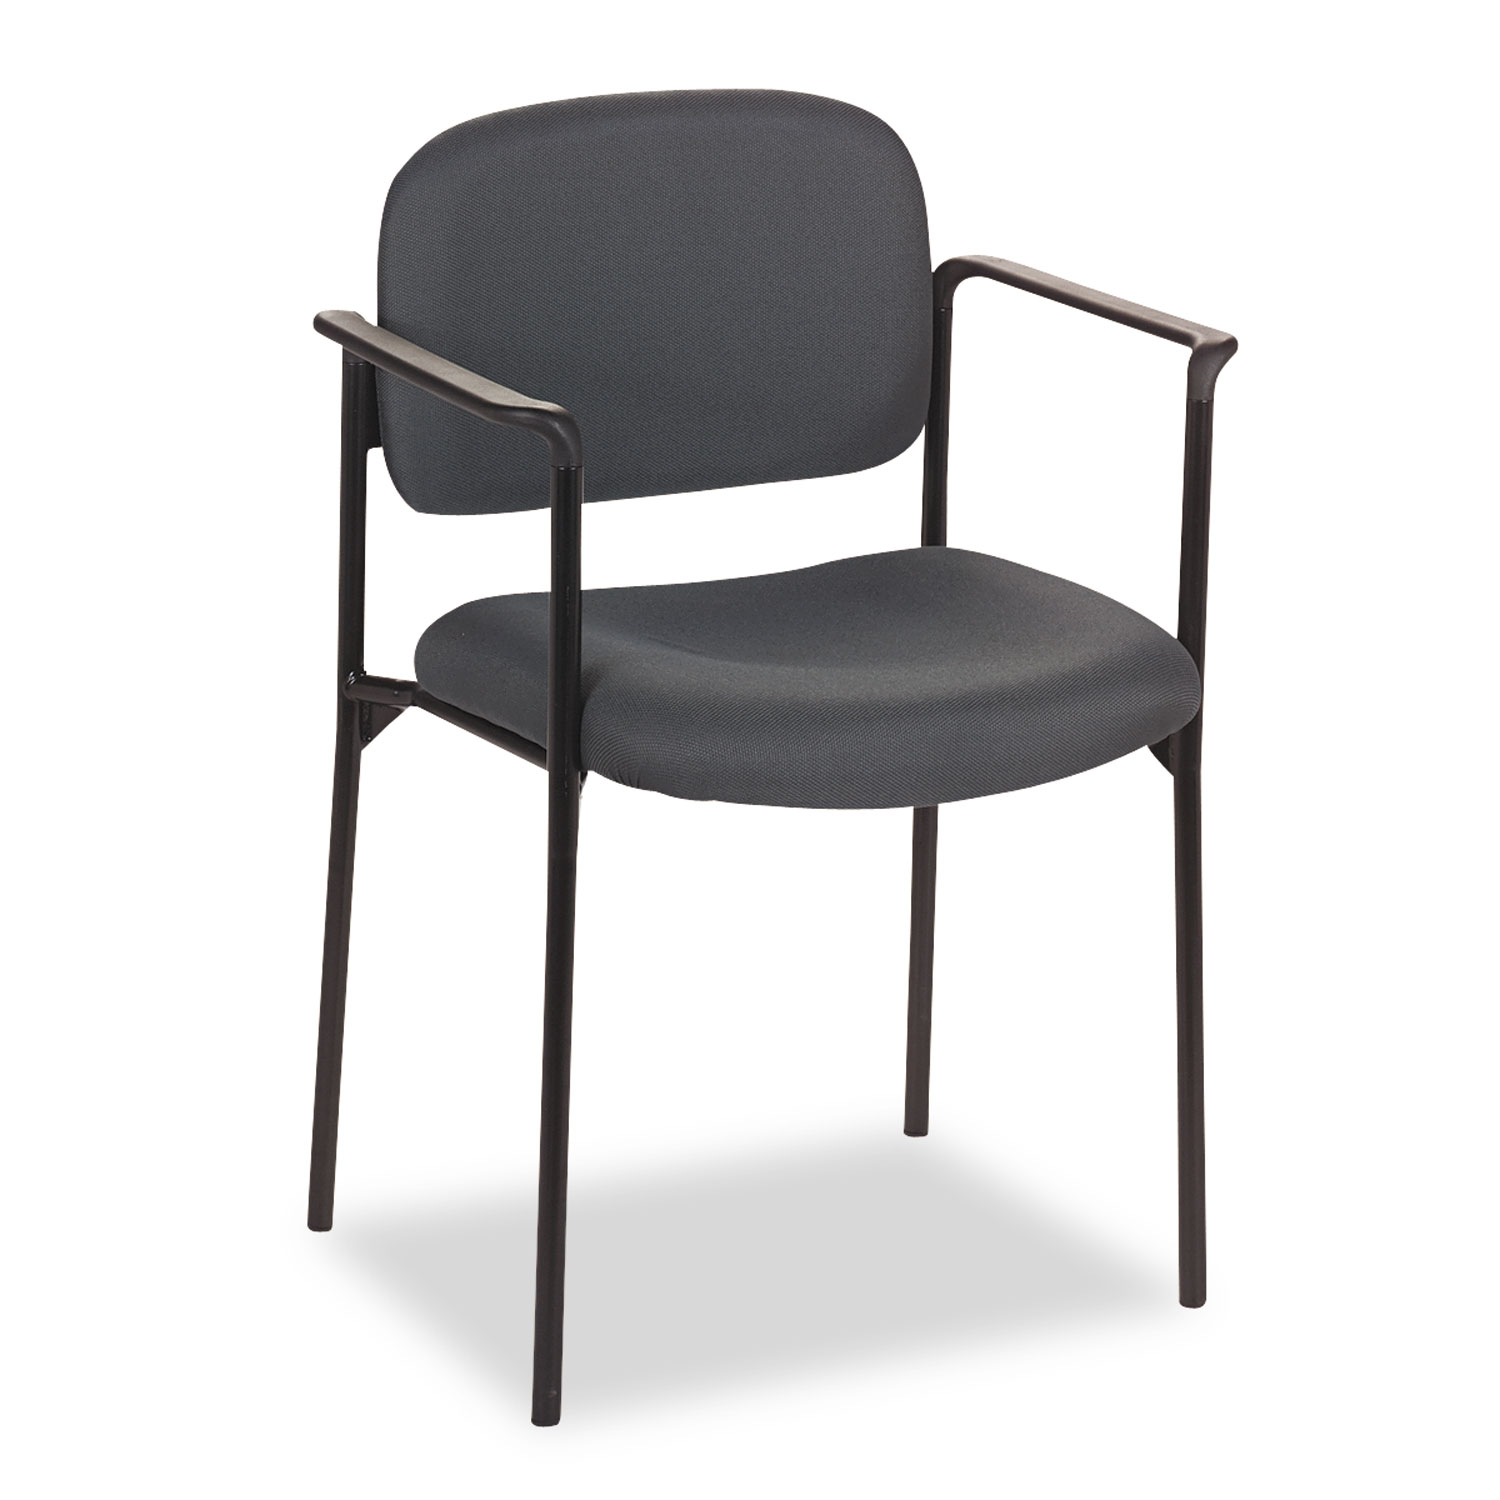  HON HVL616.VA19 VL616 Stacking Guest Chair with Arms, Charcoal Seat/Charcoal Back, Black Base (BSXVL616VA19) 